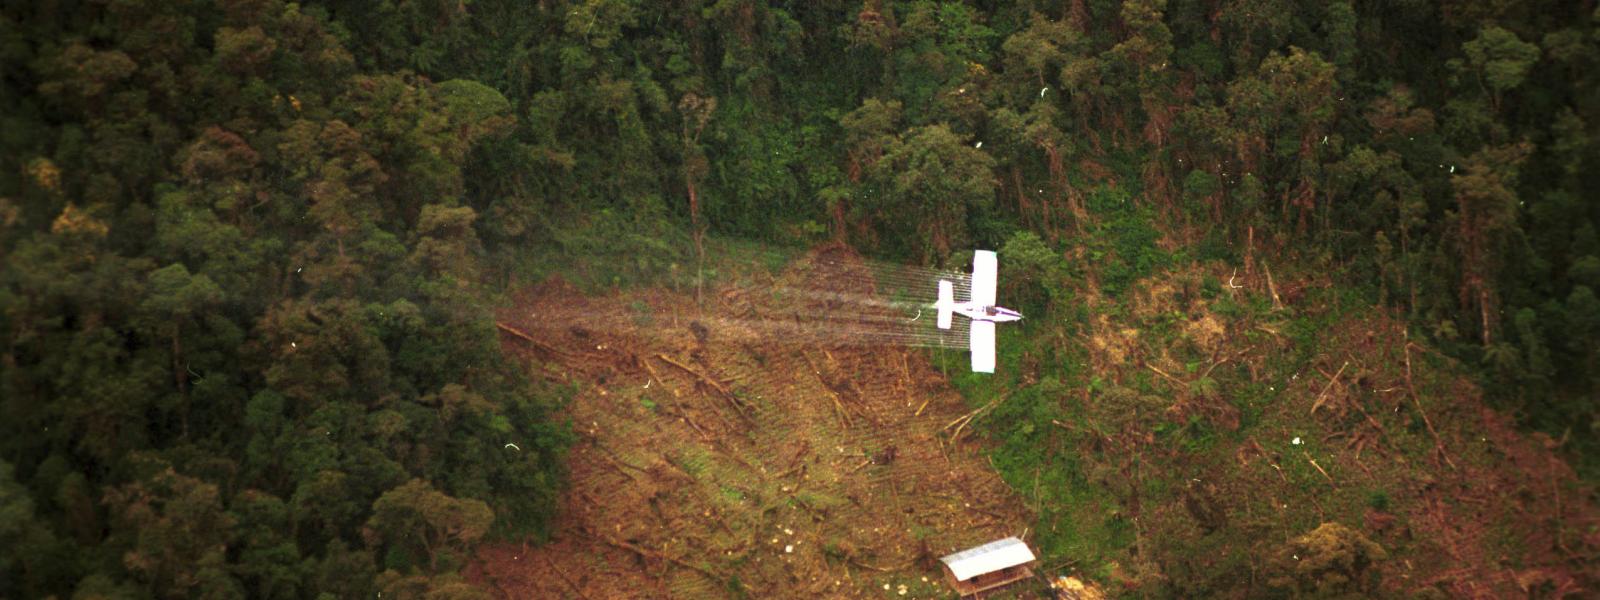 Plan Colombia: Aerial Spraying in Colombia